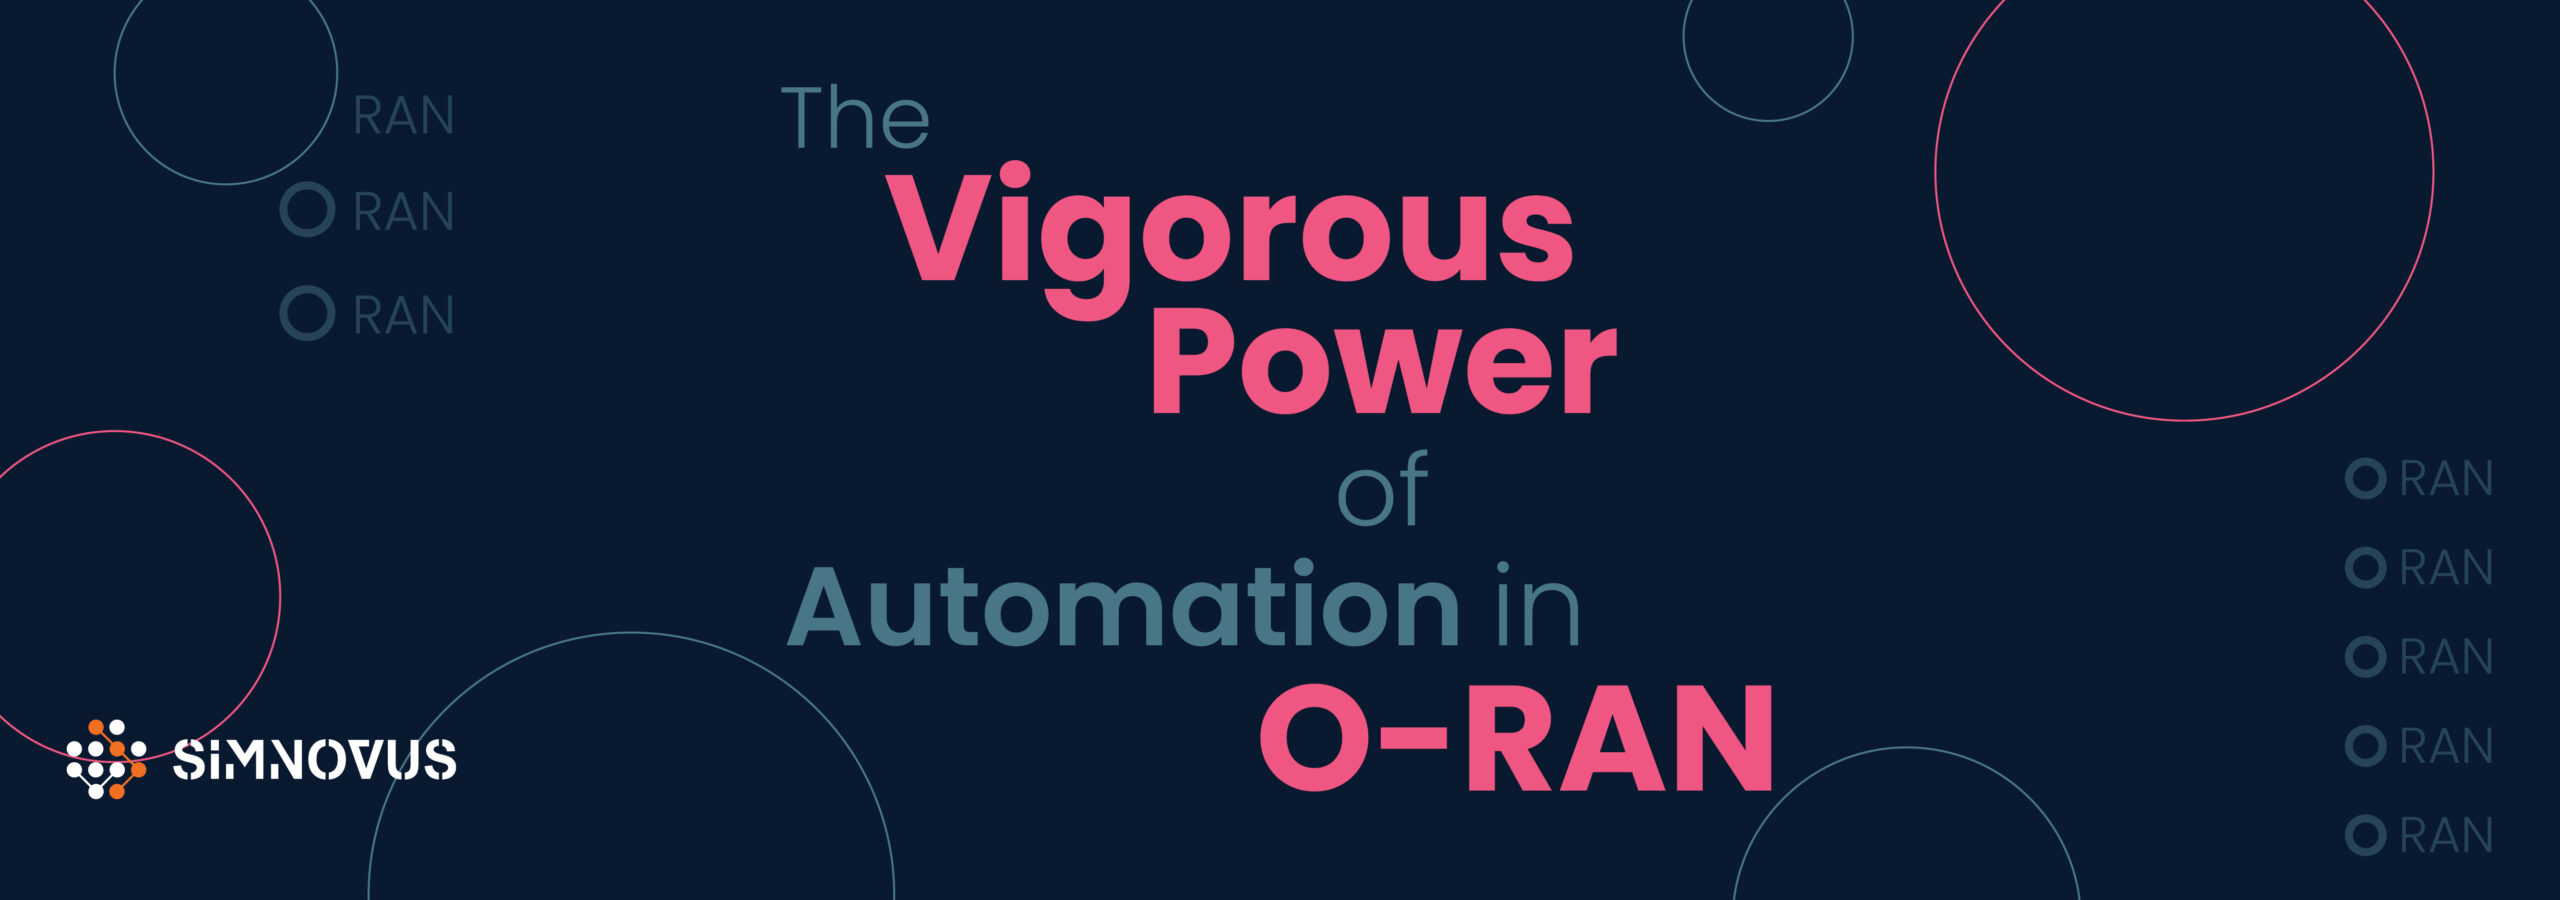 Power of Automation in Open RAN